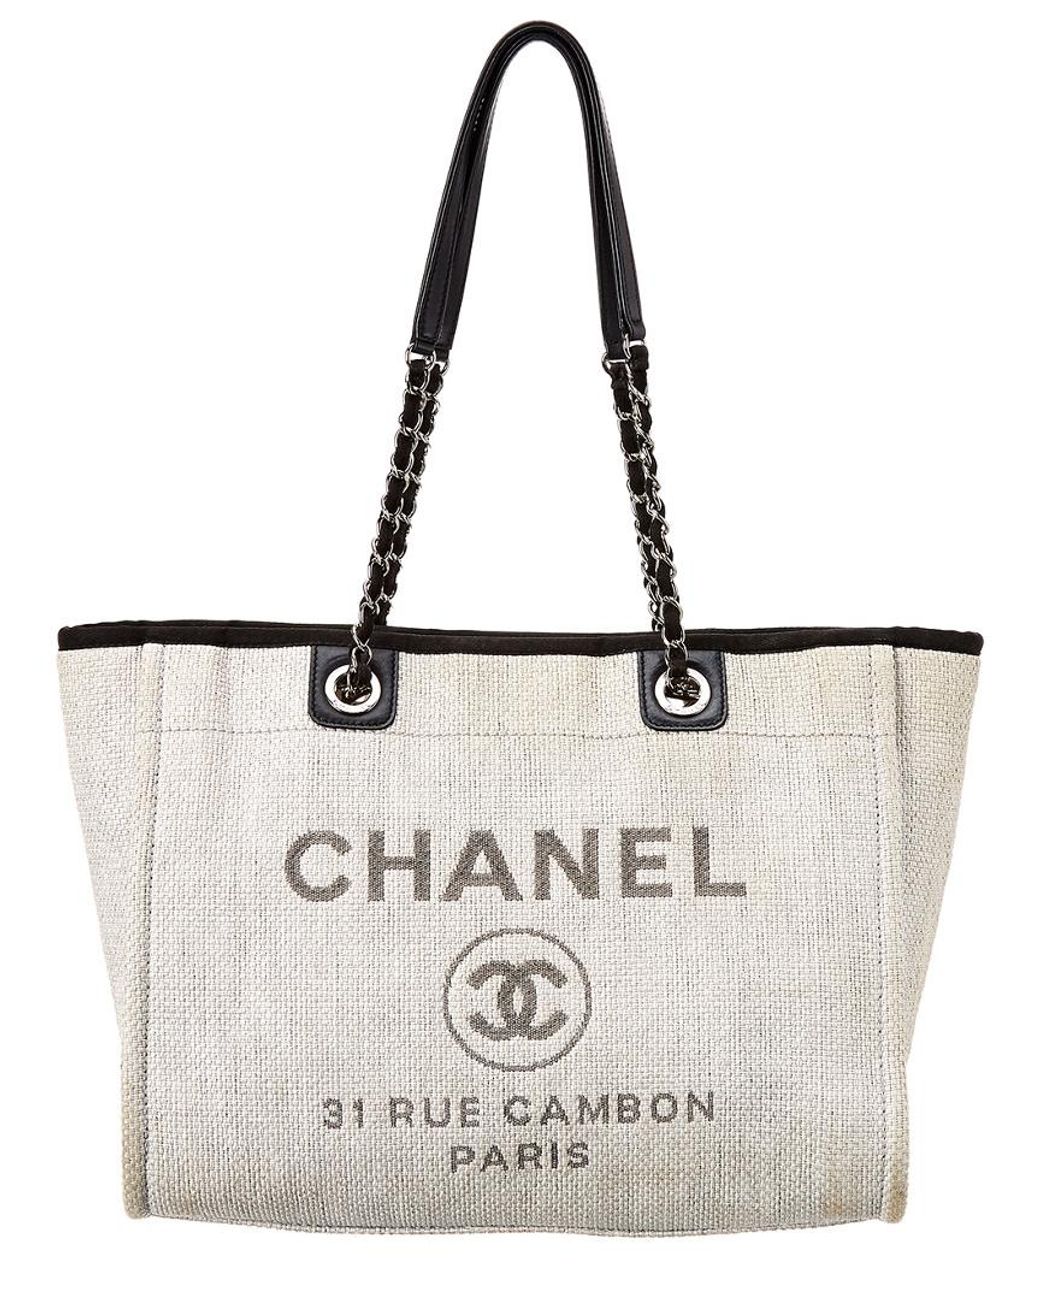 Chanel Light Grey Canvas Large Deauville Tote in Gray | Lyst